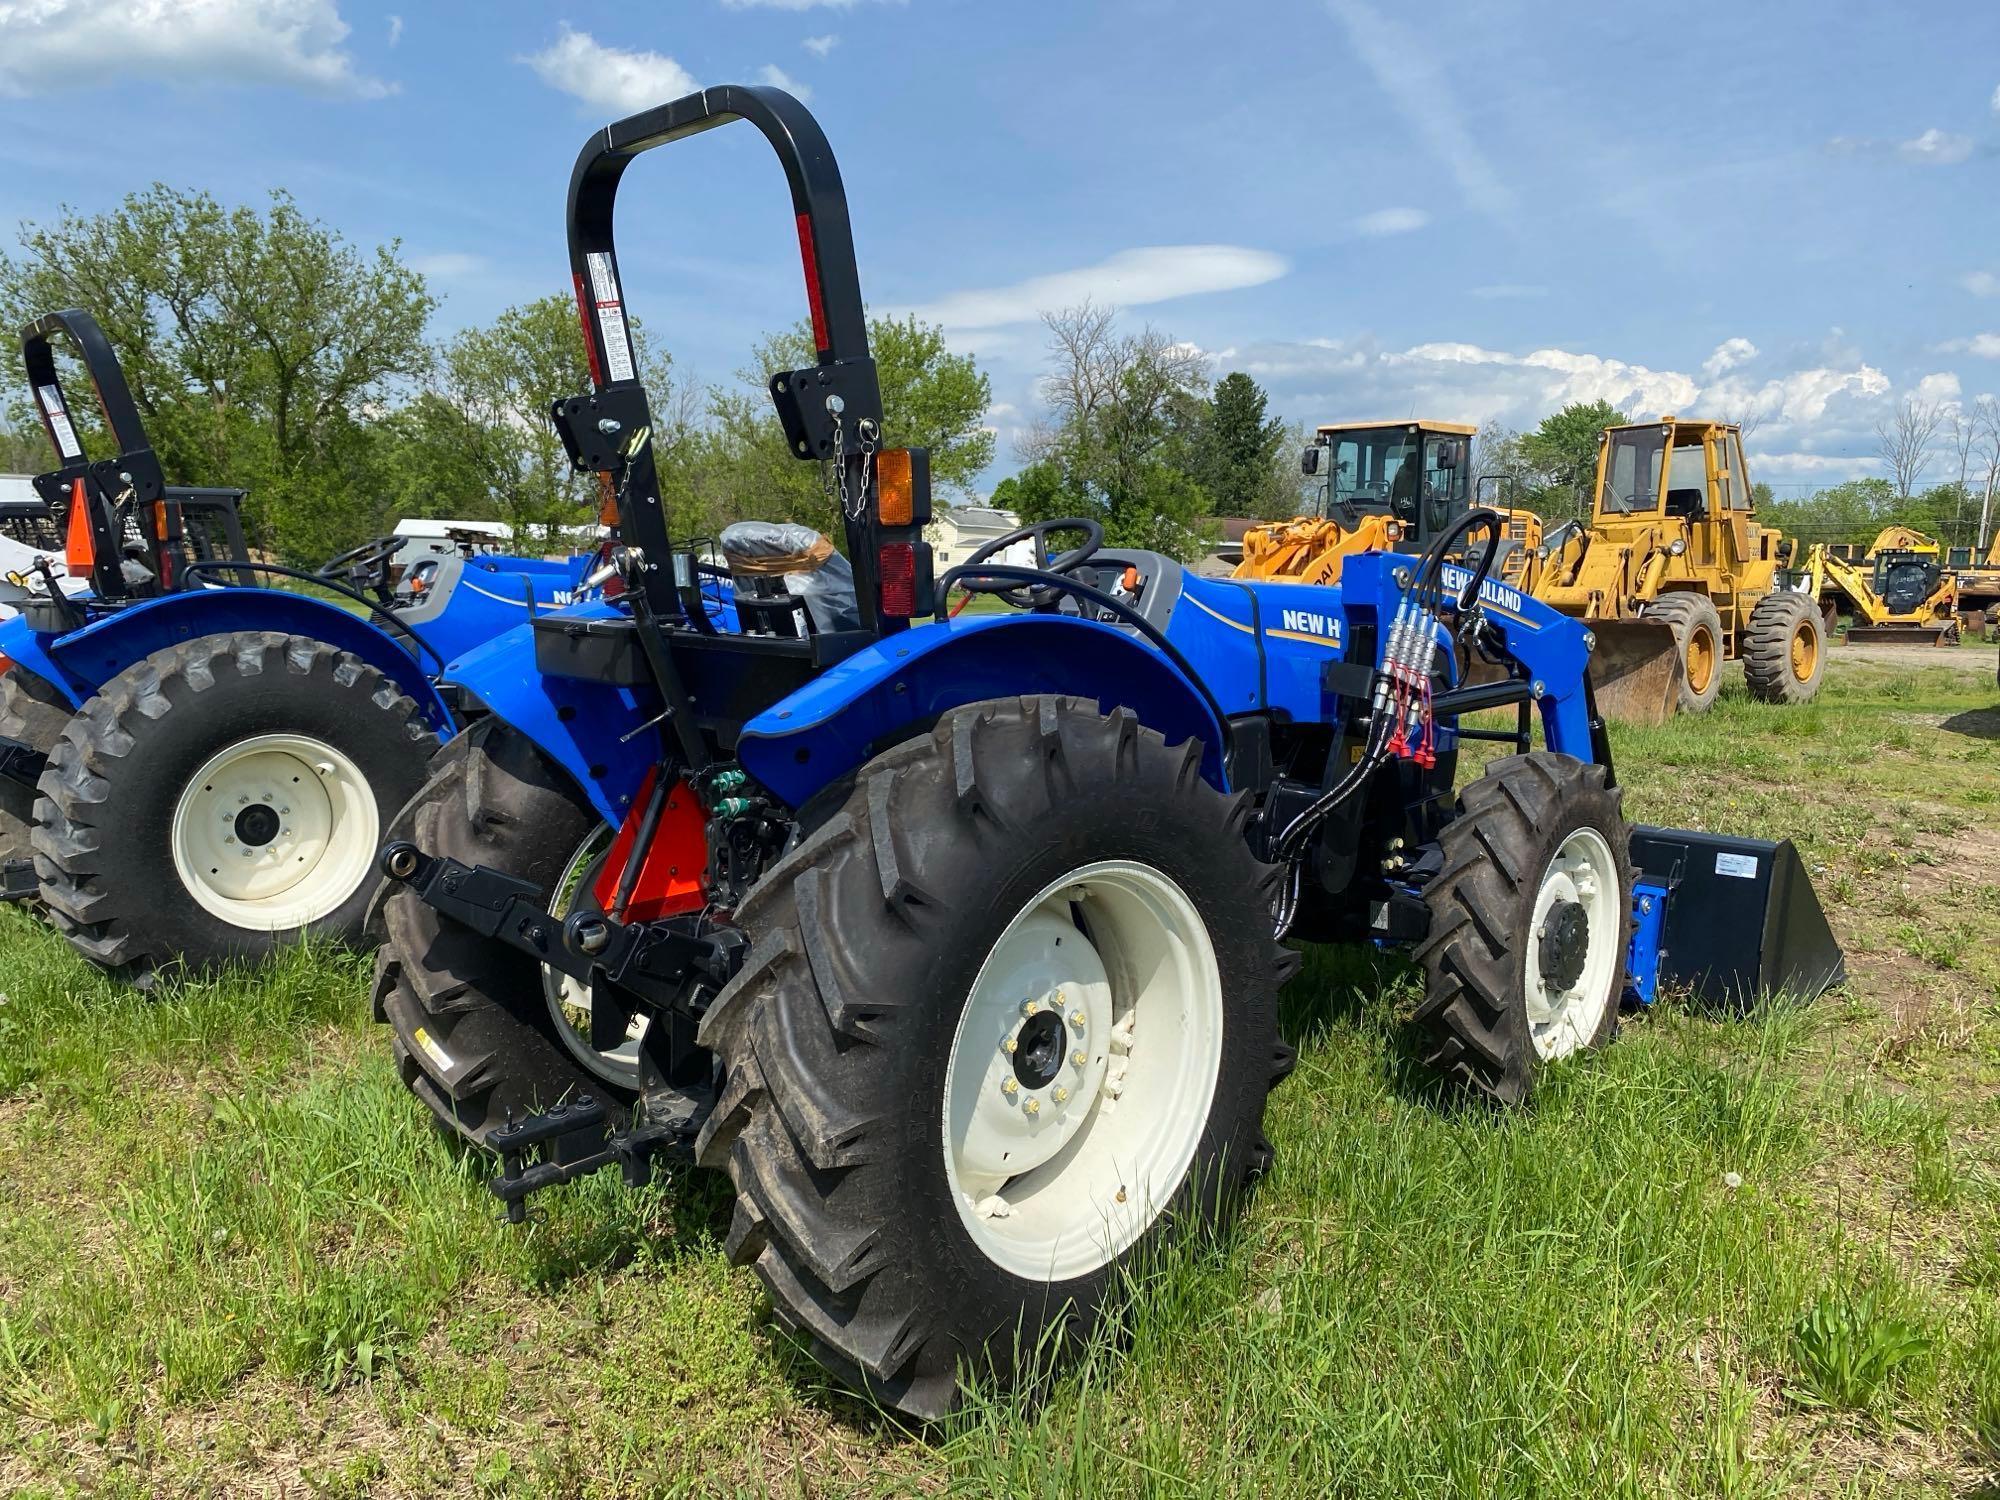 NEW UNUSED NEW HOLLAND WORKMASTER 70 TRACTOR LOADER 4x4, SN-50975 powered by diesel engine, equipped